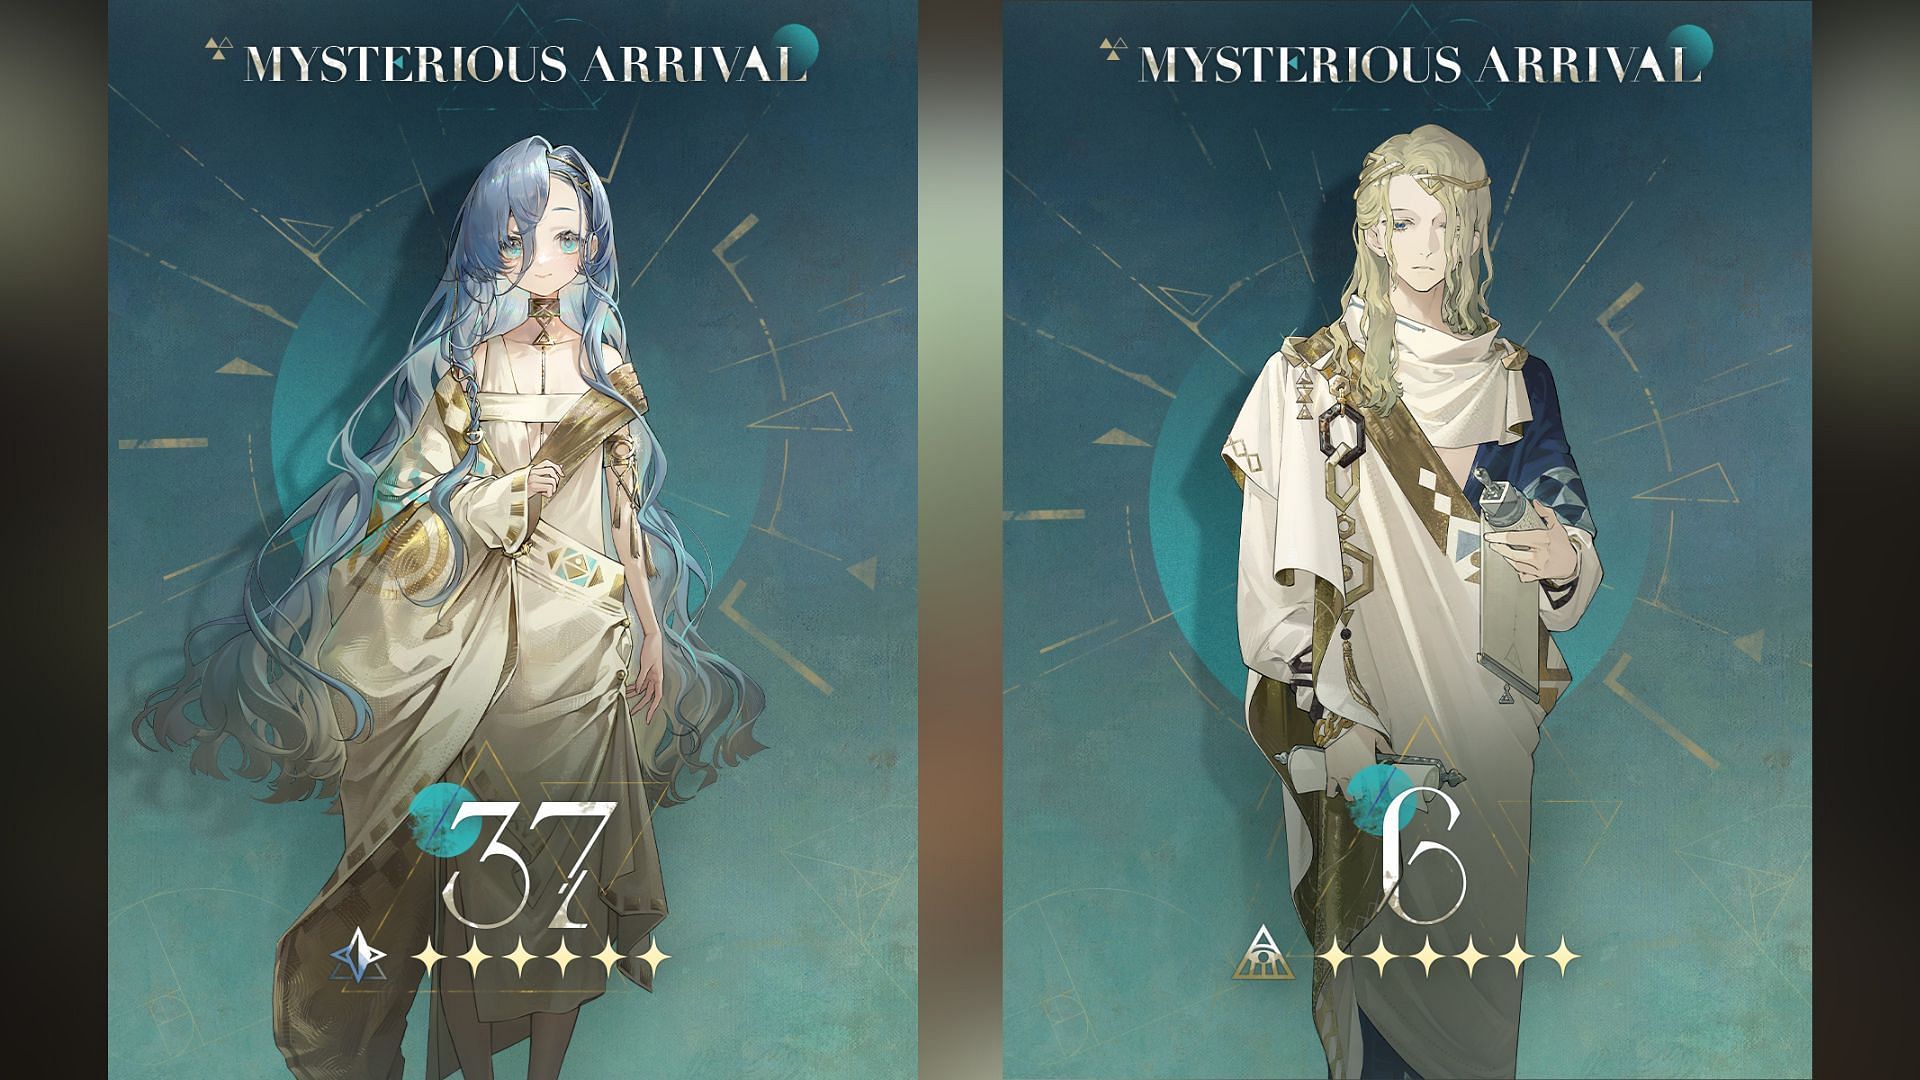 The Beyond the World of Matters banner will debut 37, and the Seeker in the Cave banner will debut 6 in the Reverse 1999 version 1.4 update (Image via Bluepoch)